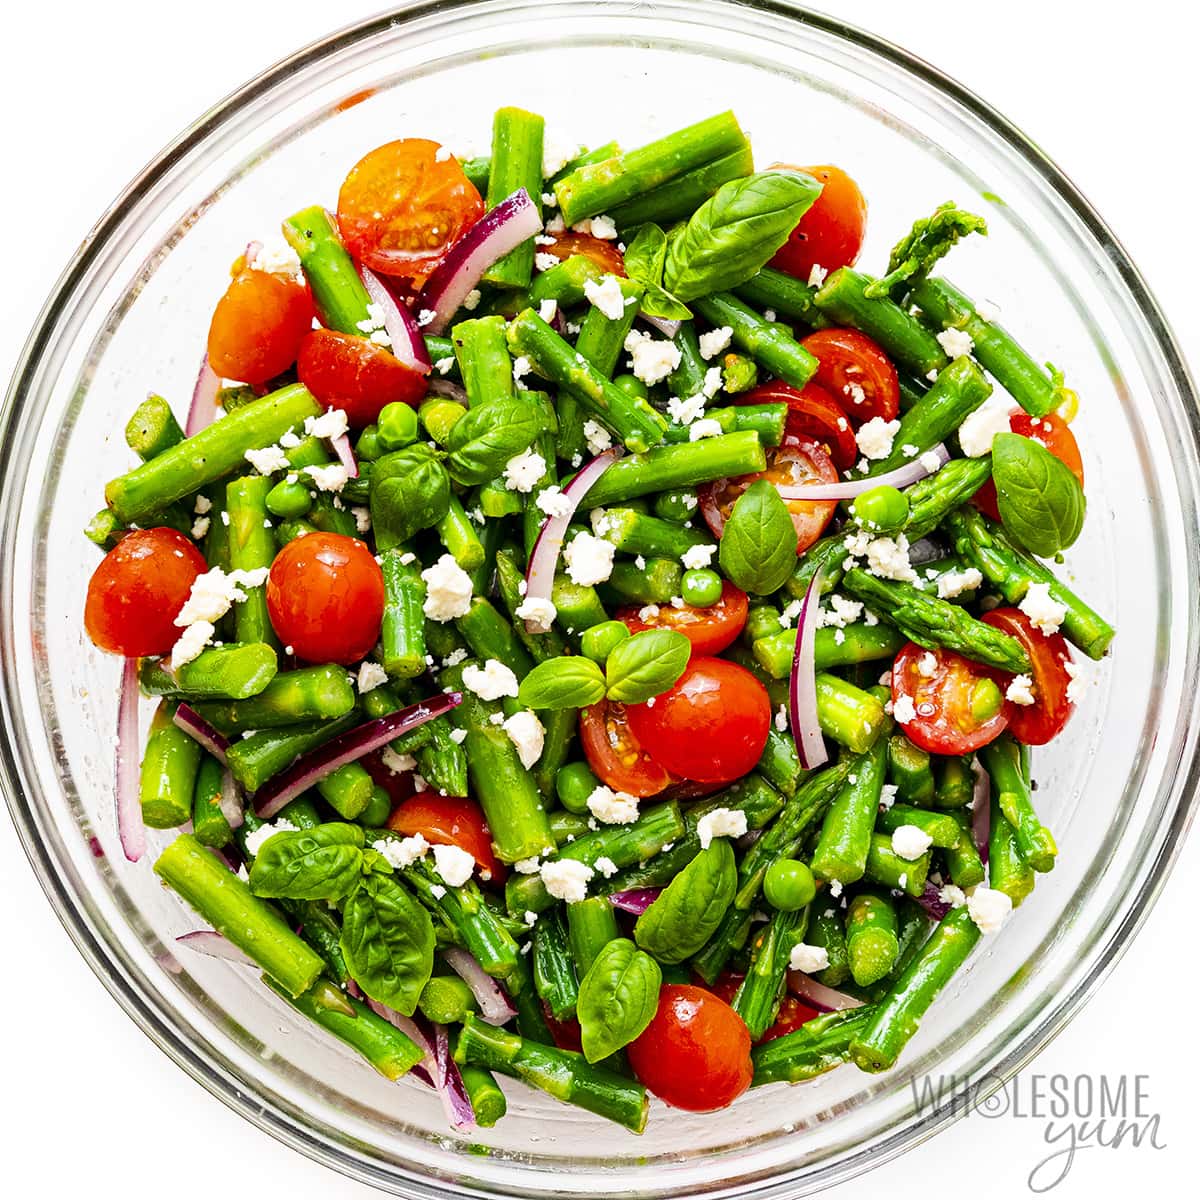 Tossed asparagus salad with feta cheese and basil leaves on top.